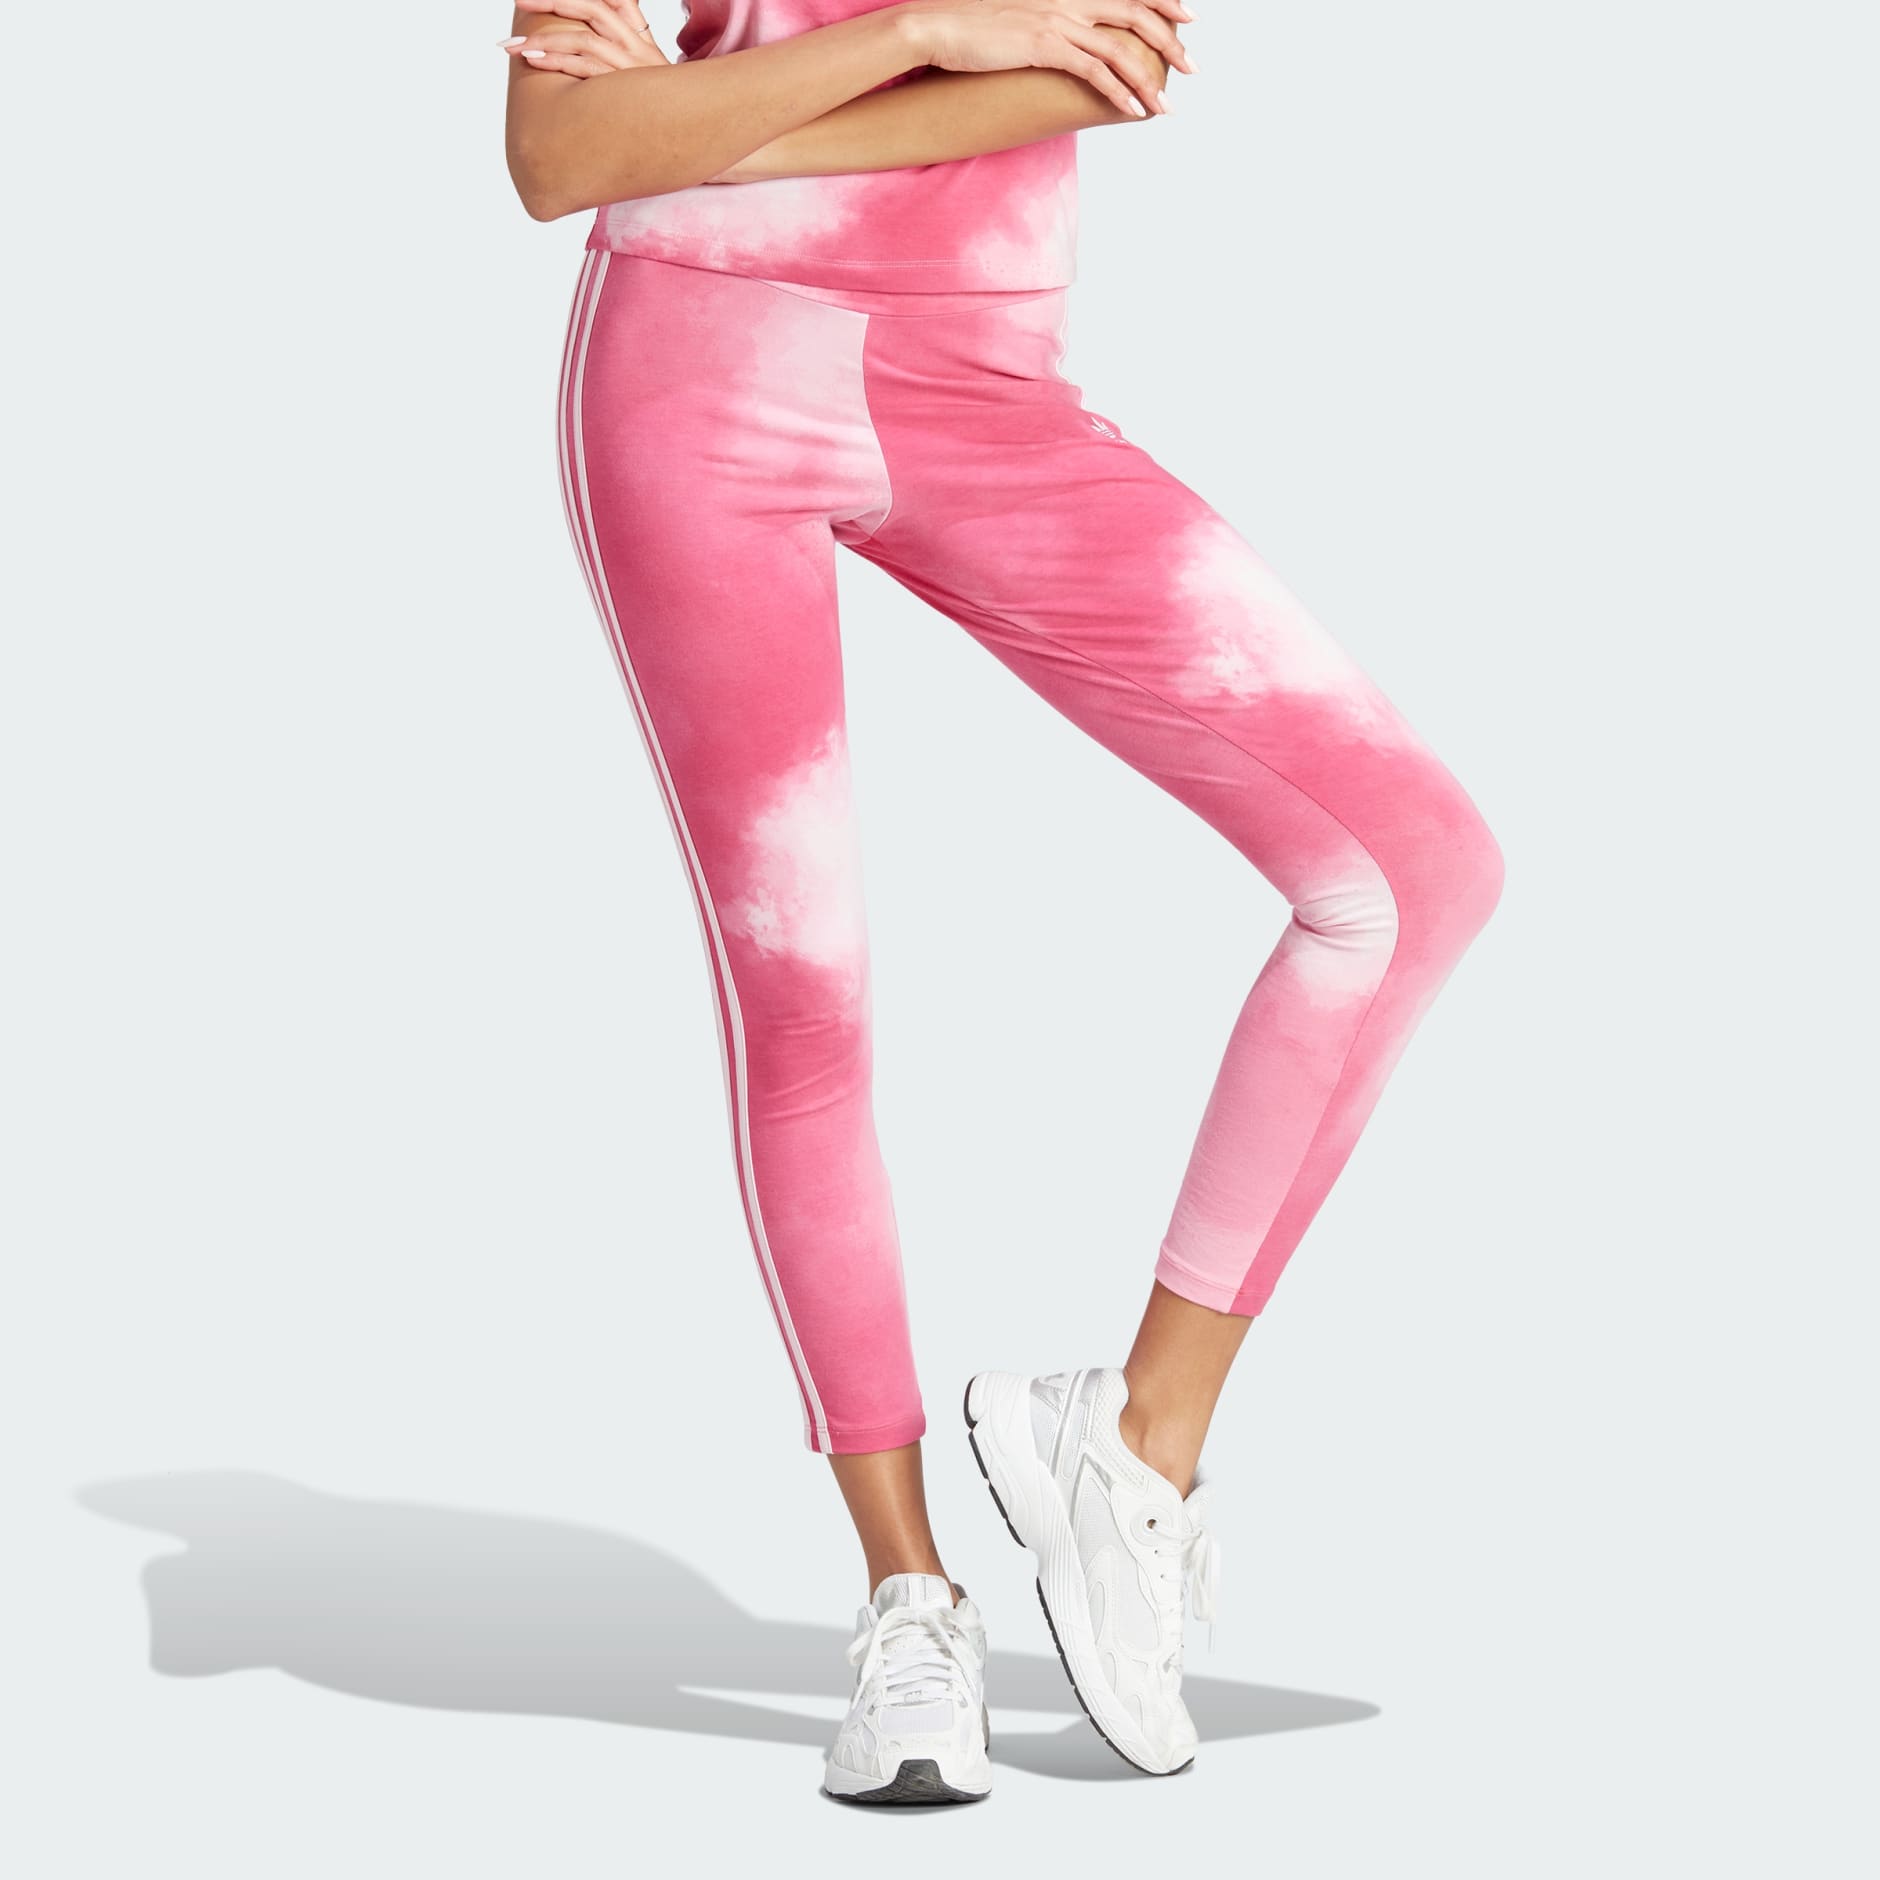 Women's Clothing - Color Fade 7/8 Tights - Pink